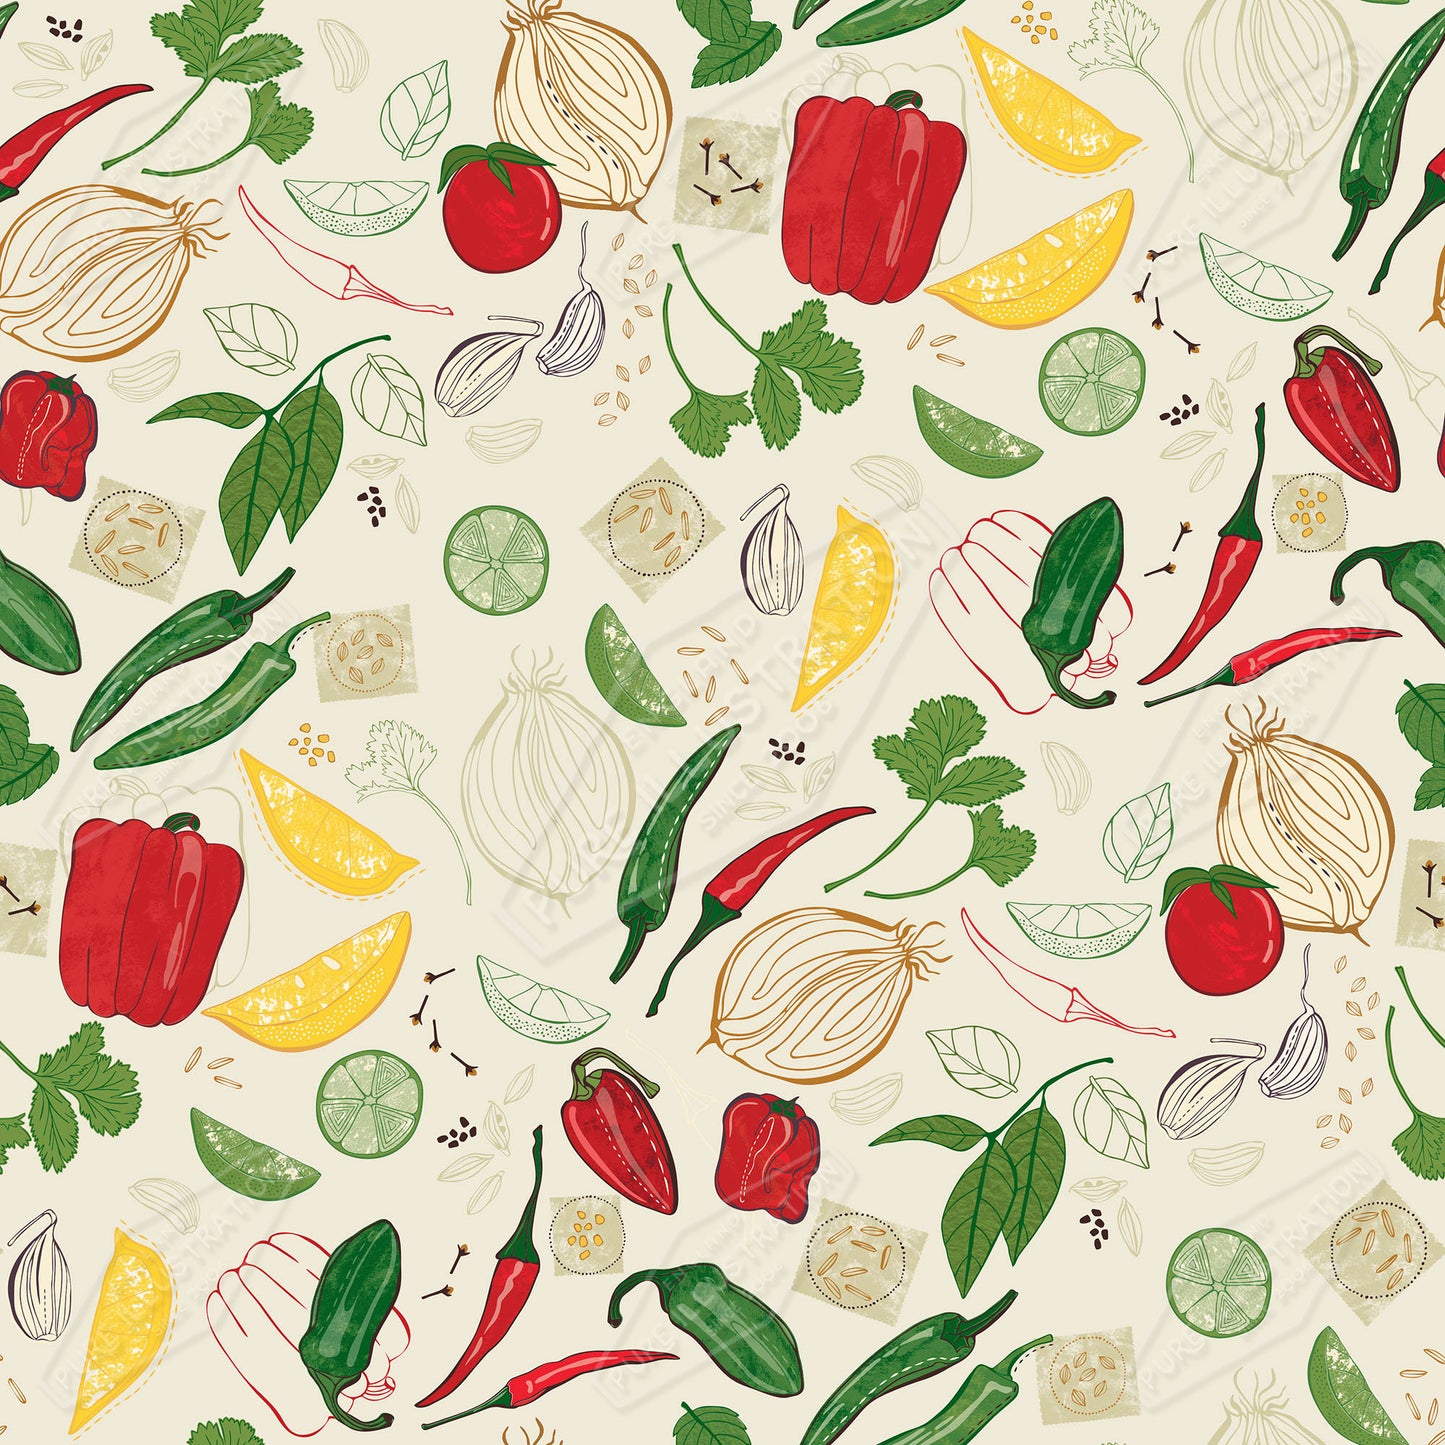 00035064GEG- Gill Eggleston is represented by Pure Art Licensing Agency - Everyday Pattern Design